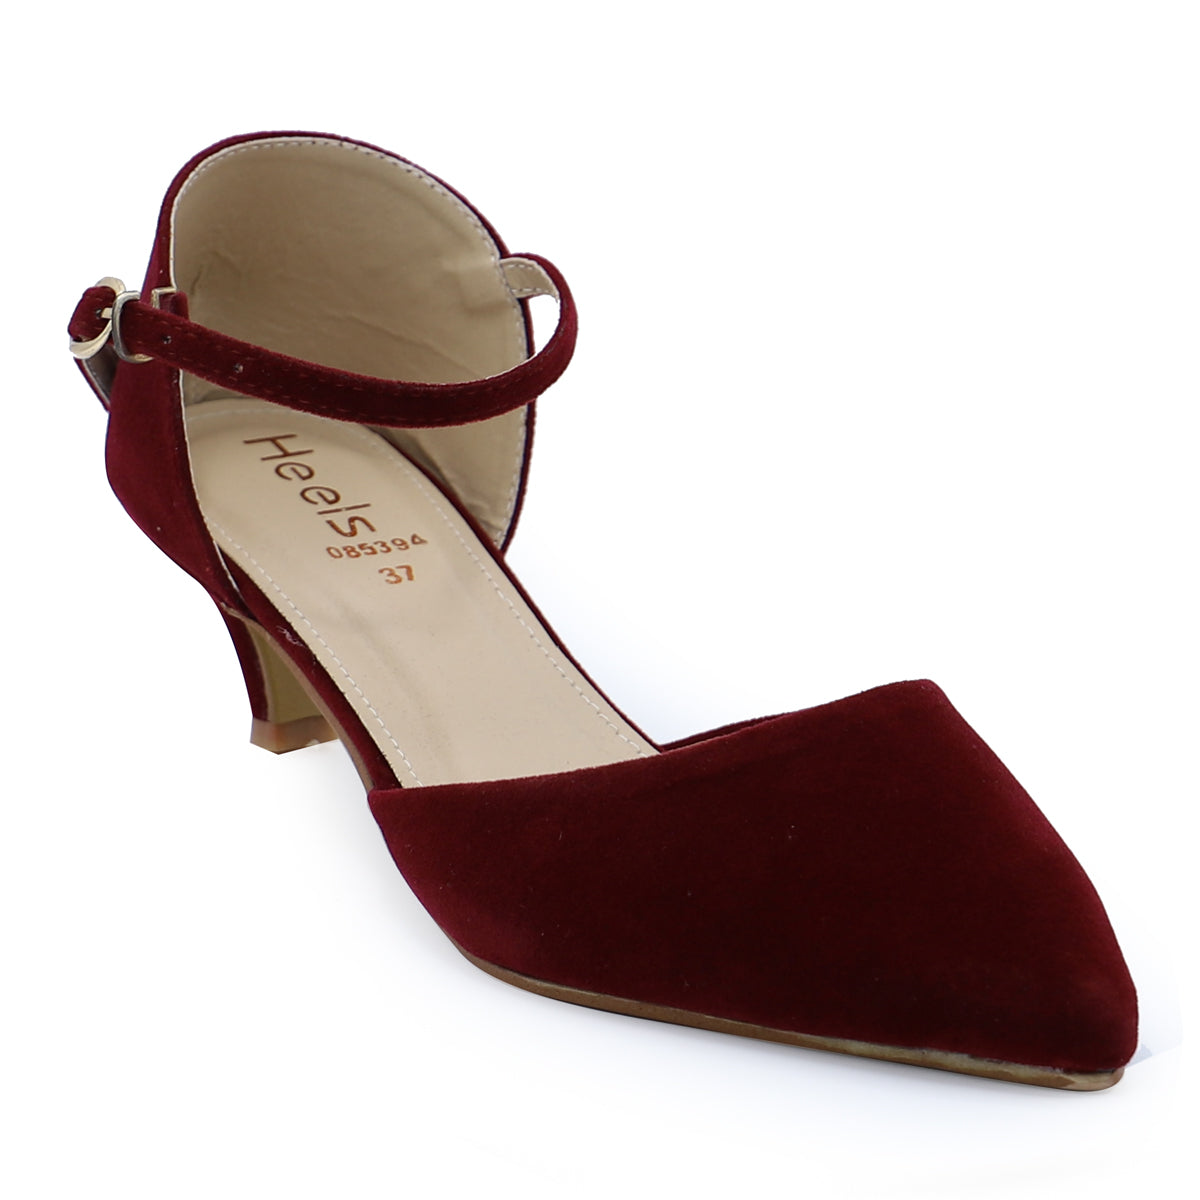 beautiful | Burgundy shoes, Shoes for college, Heels